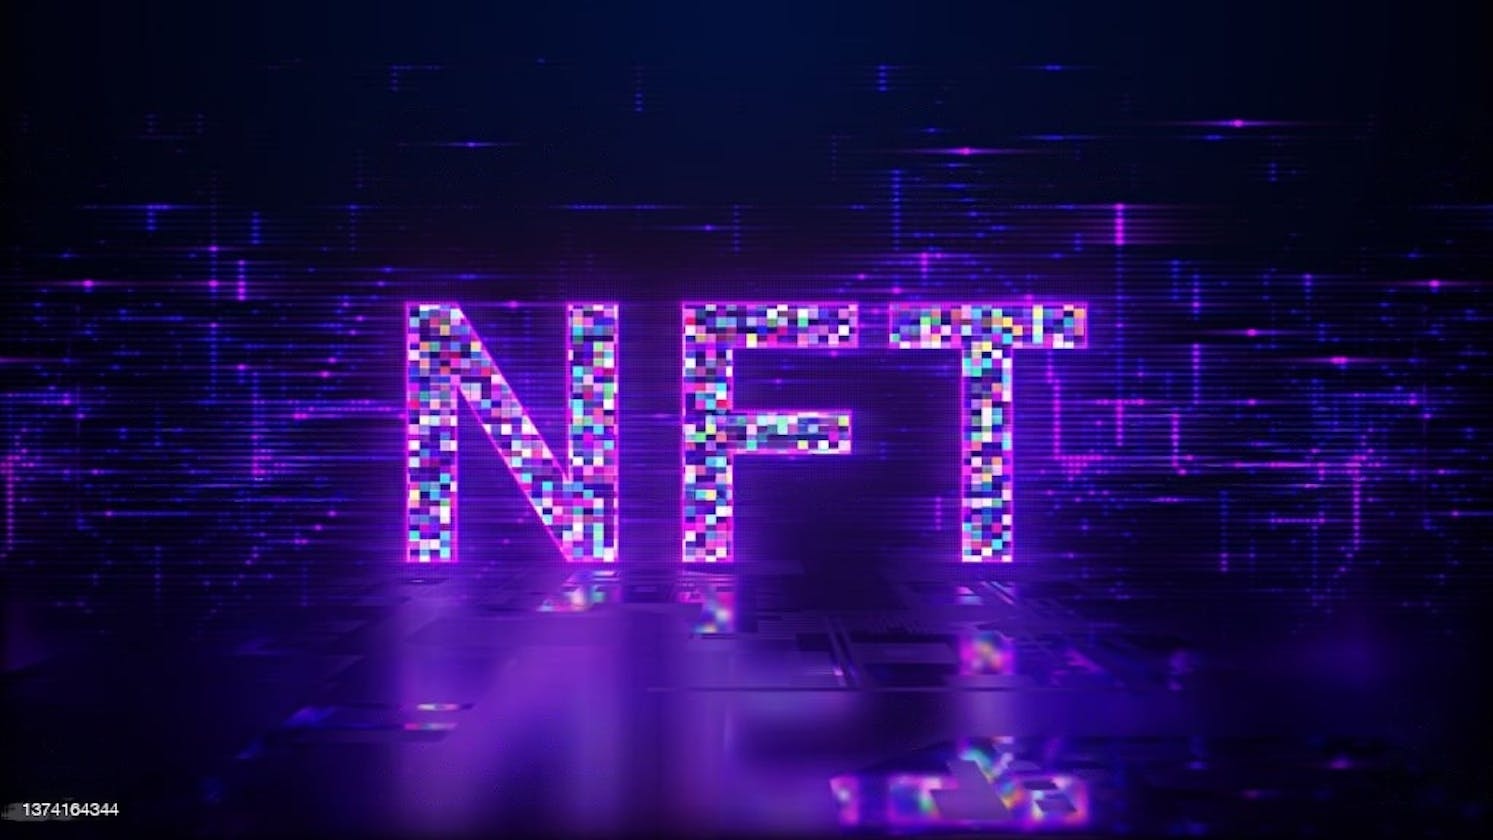 Minting NFTs: A Deep Dive into the Process